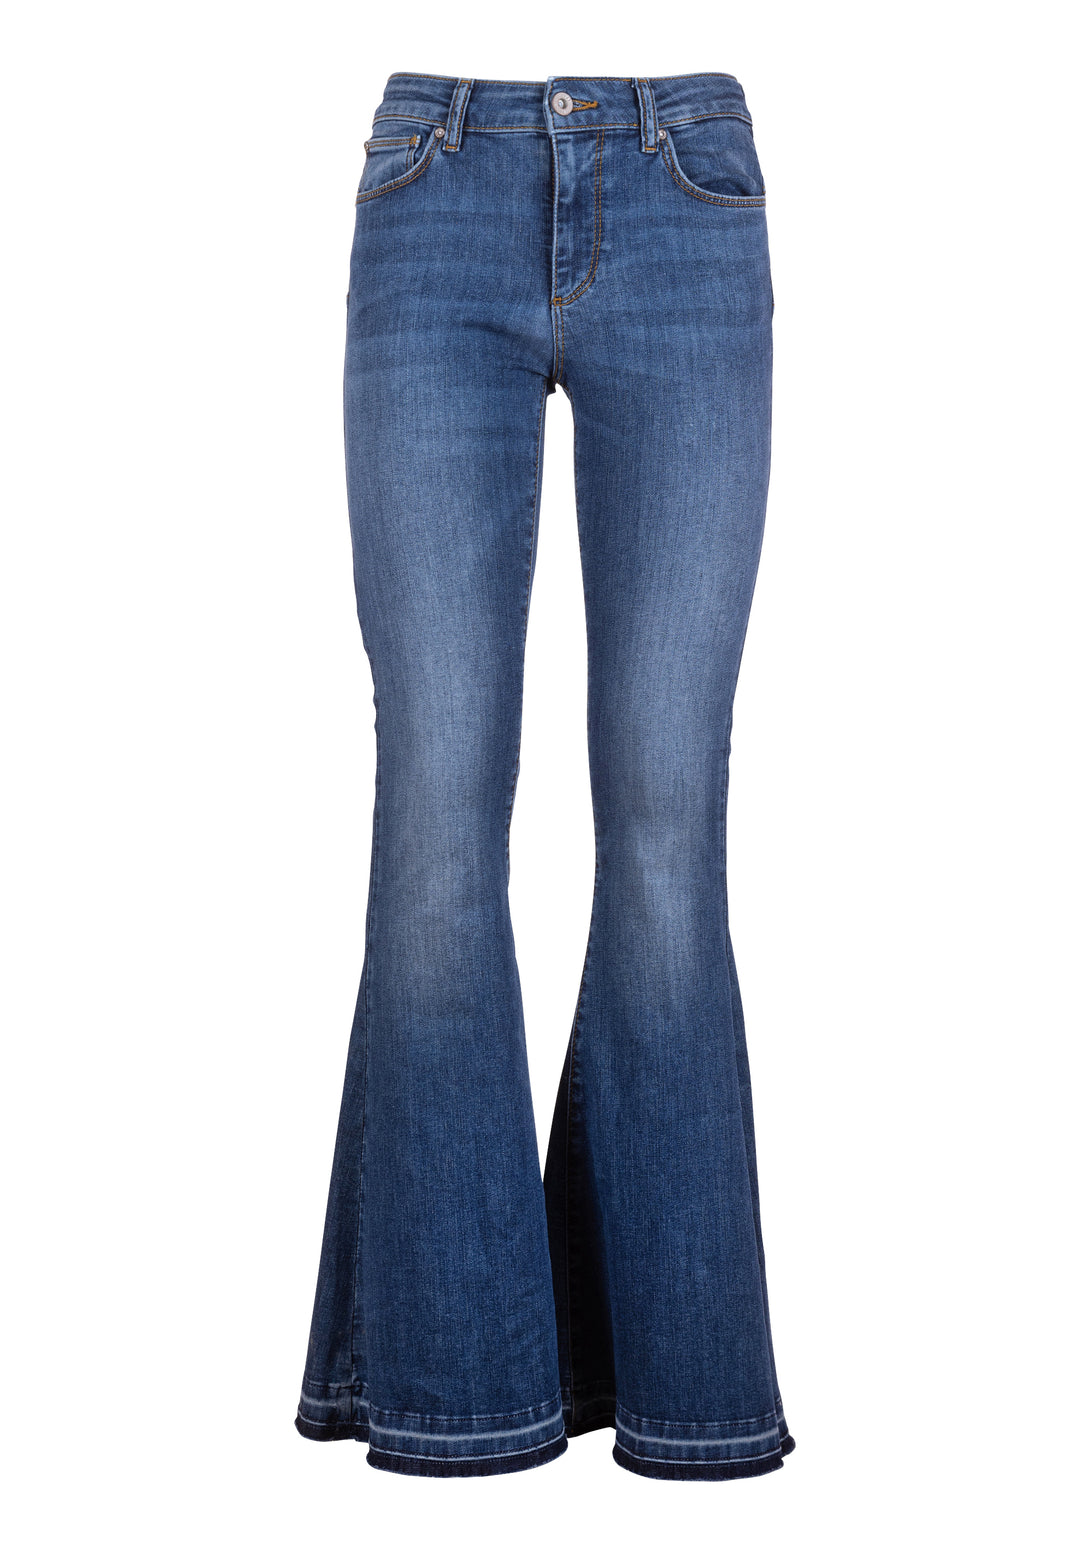 Jeans bootcut fit with push-up effect made in denim with middle wash